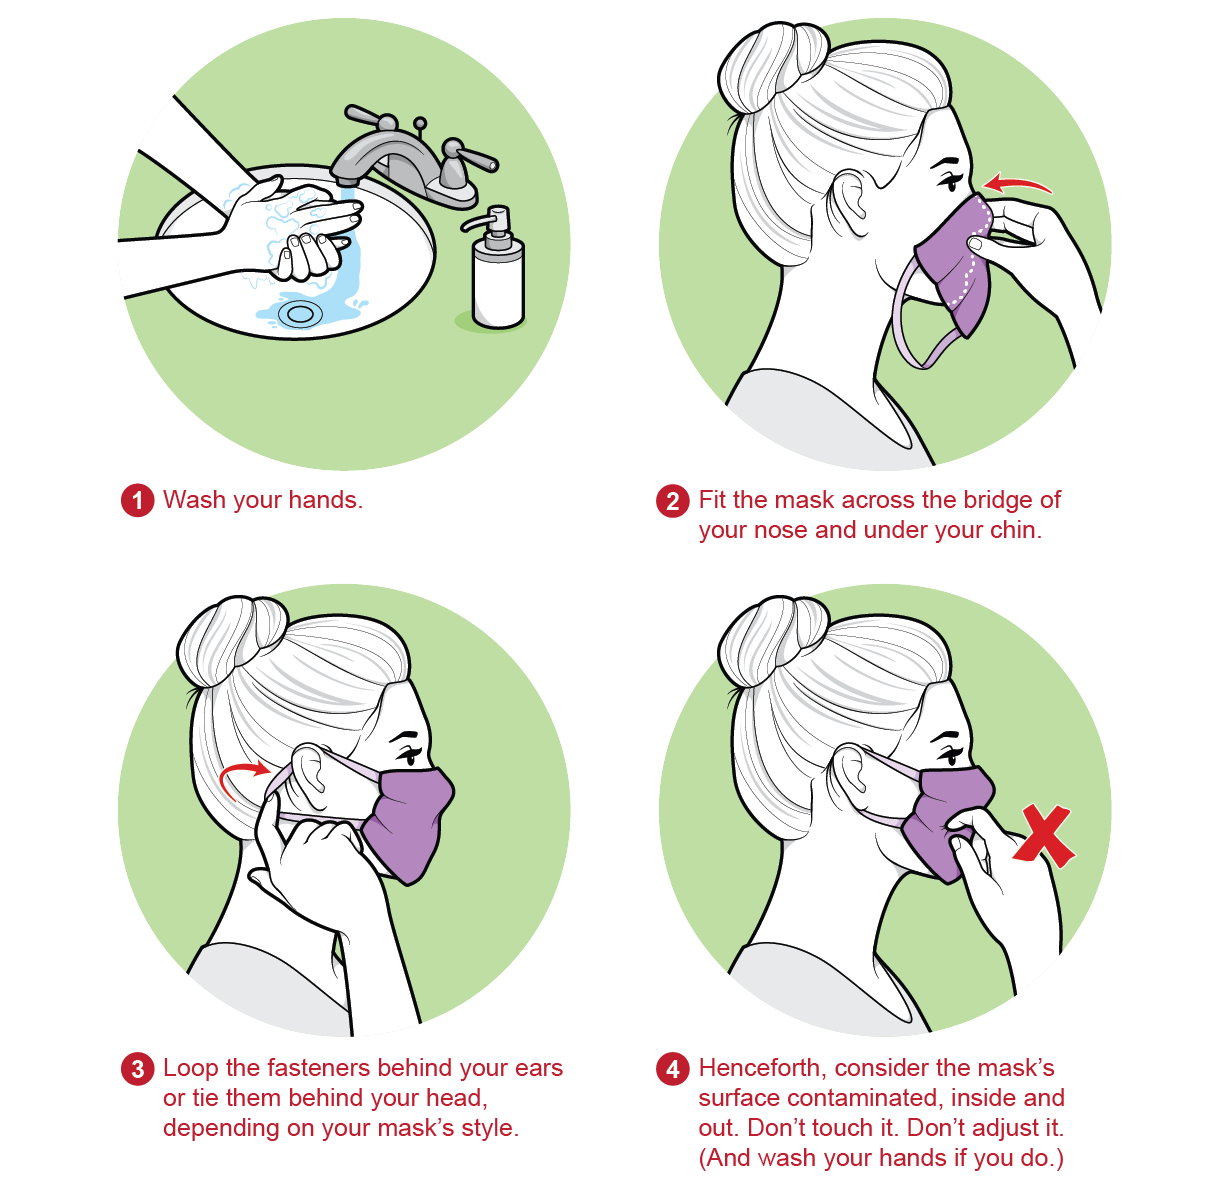 Everything you need to know about wearing masks during the COVID-19  pandemic